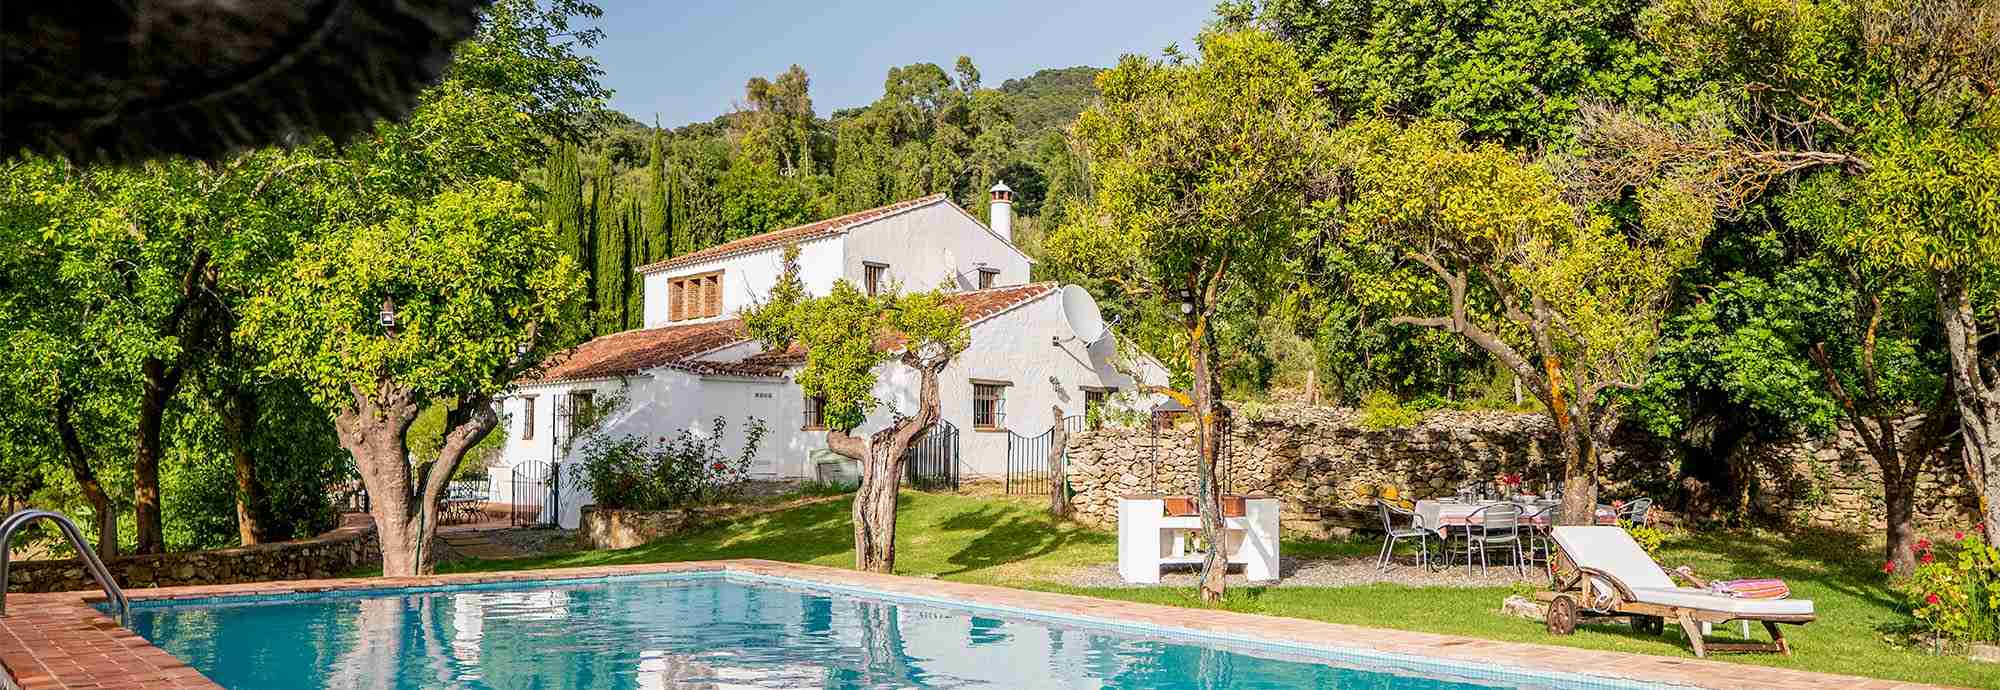 Andalucian villa with character in a very private country setting